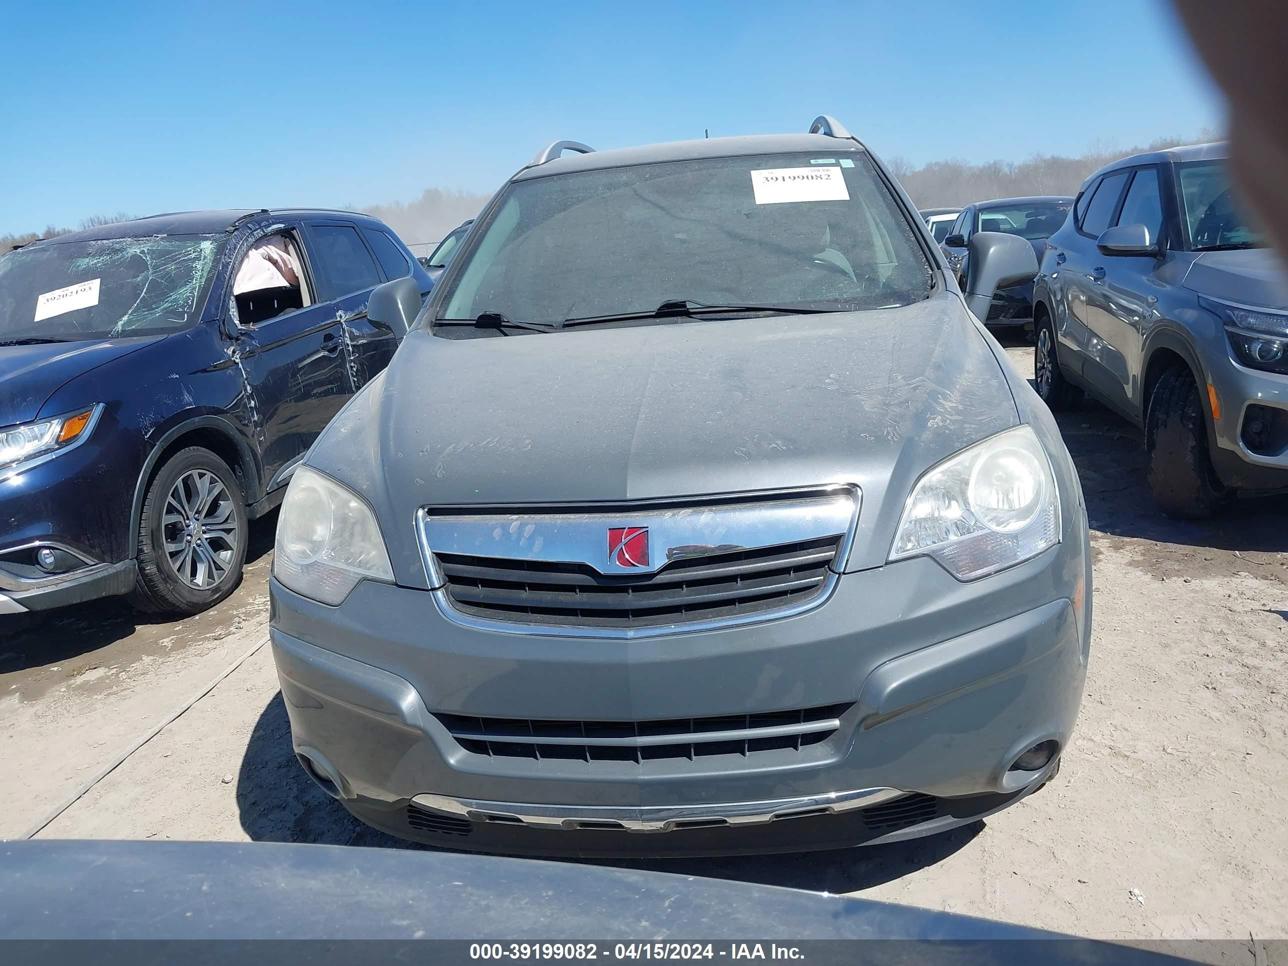 3GSCL53768S550600  - SATURN VUE  2008 IMG - 12